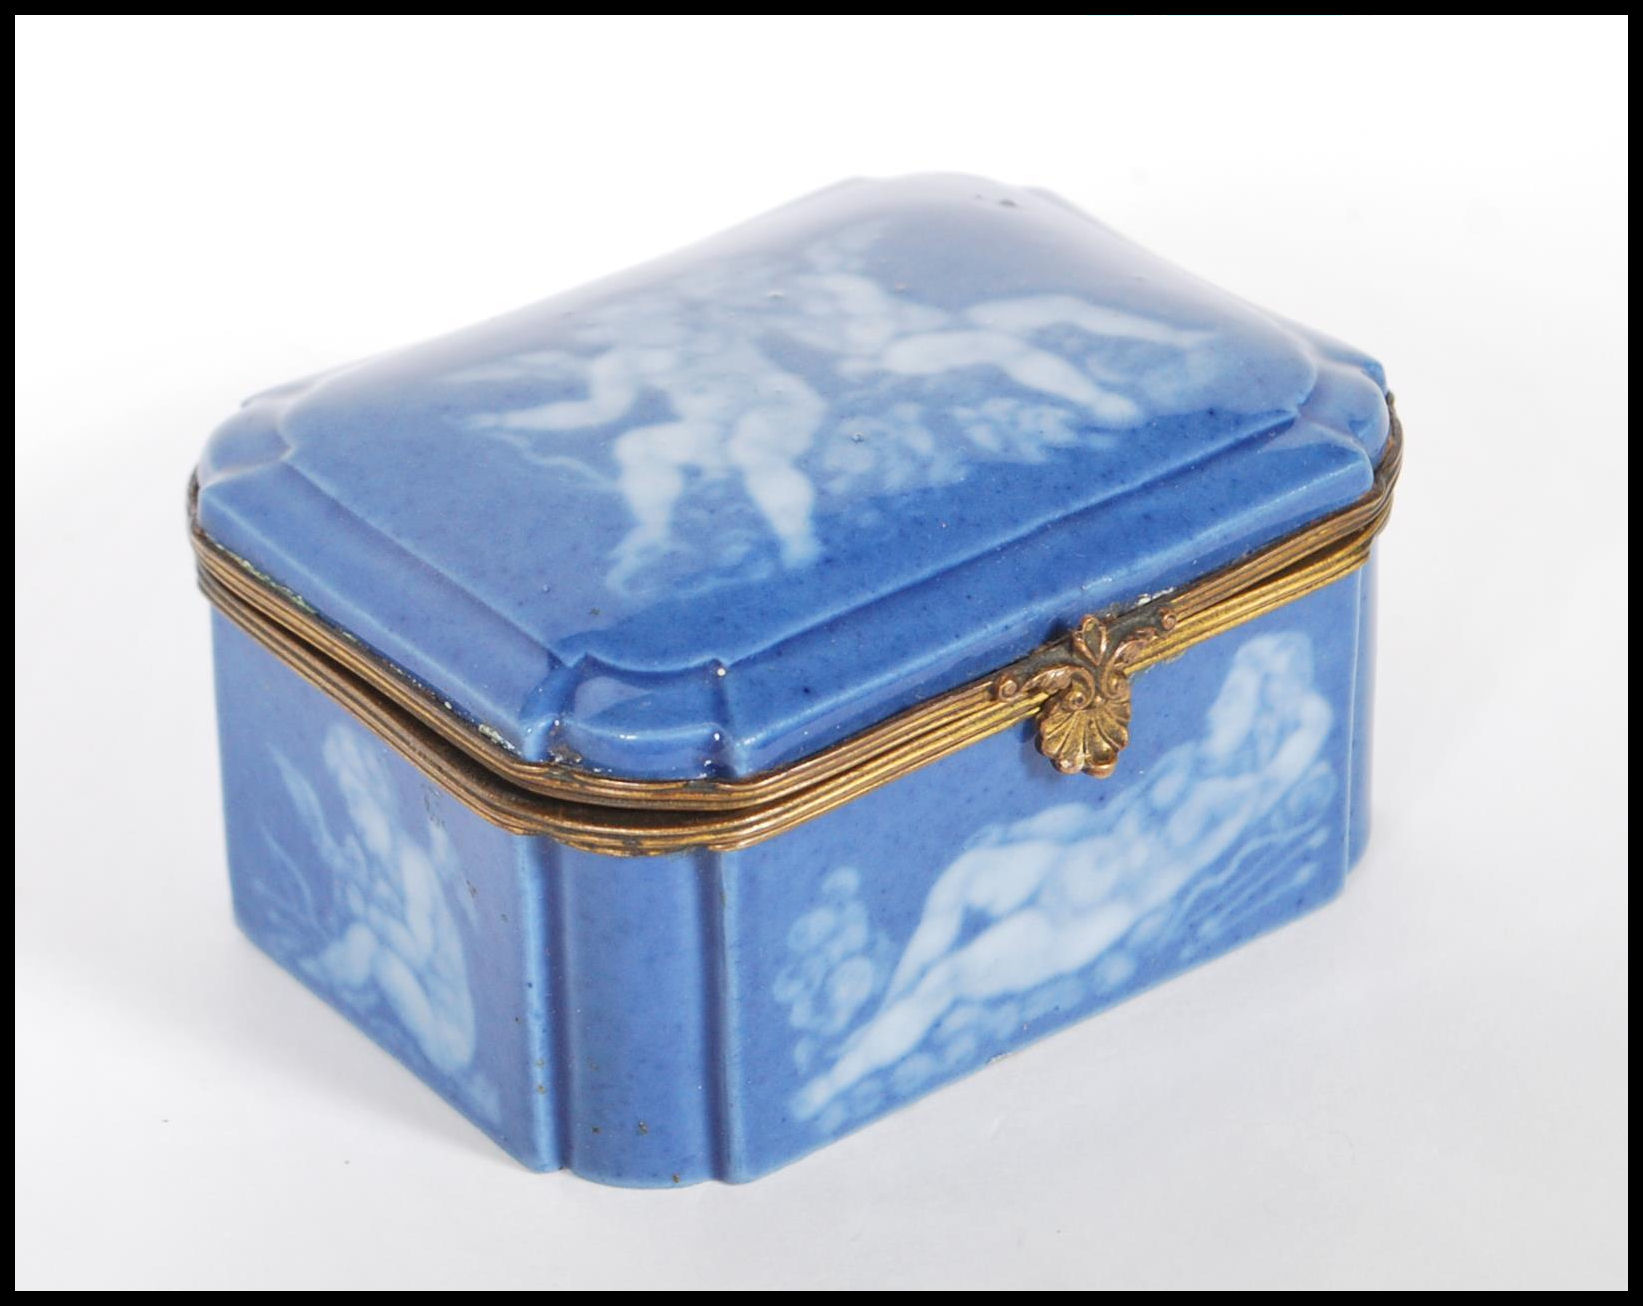 An early 20th Century continental German porcelain blue ceramic casket / trinket box with a pat - Image 2 of 9